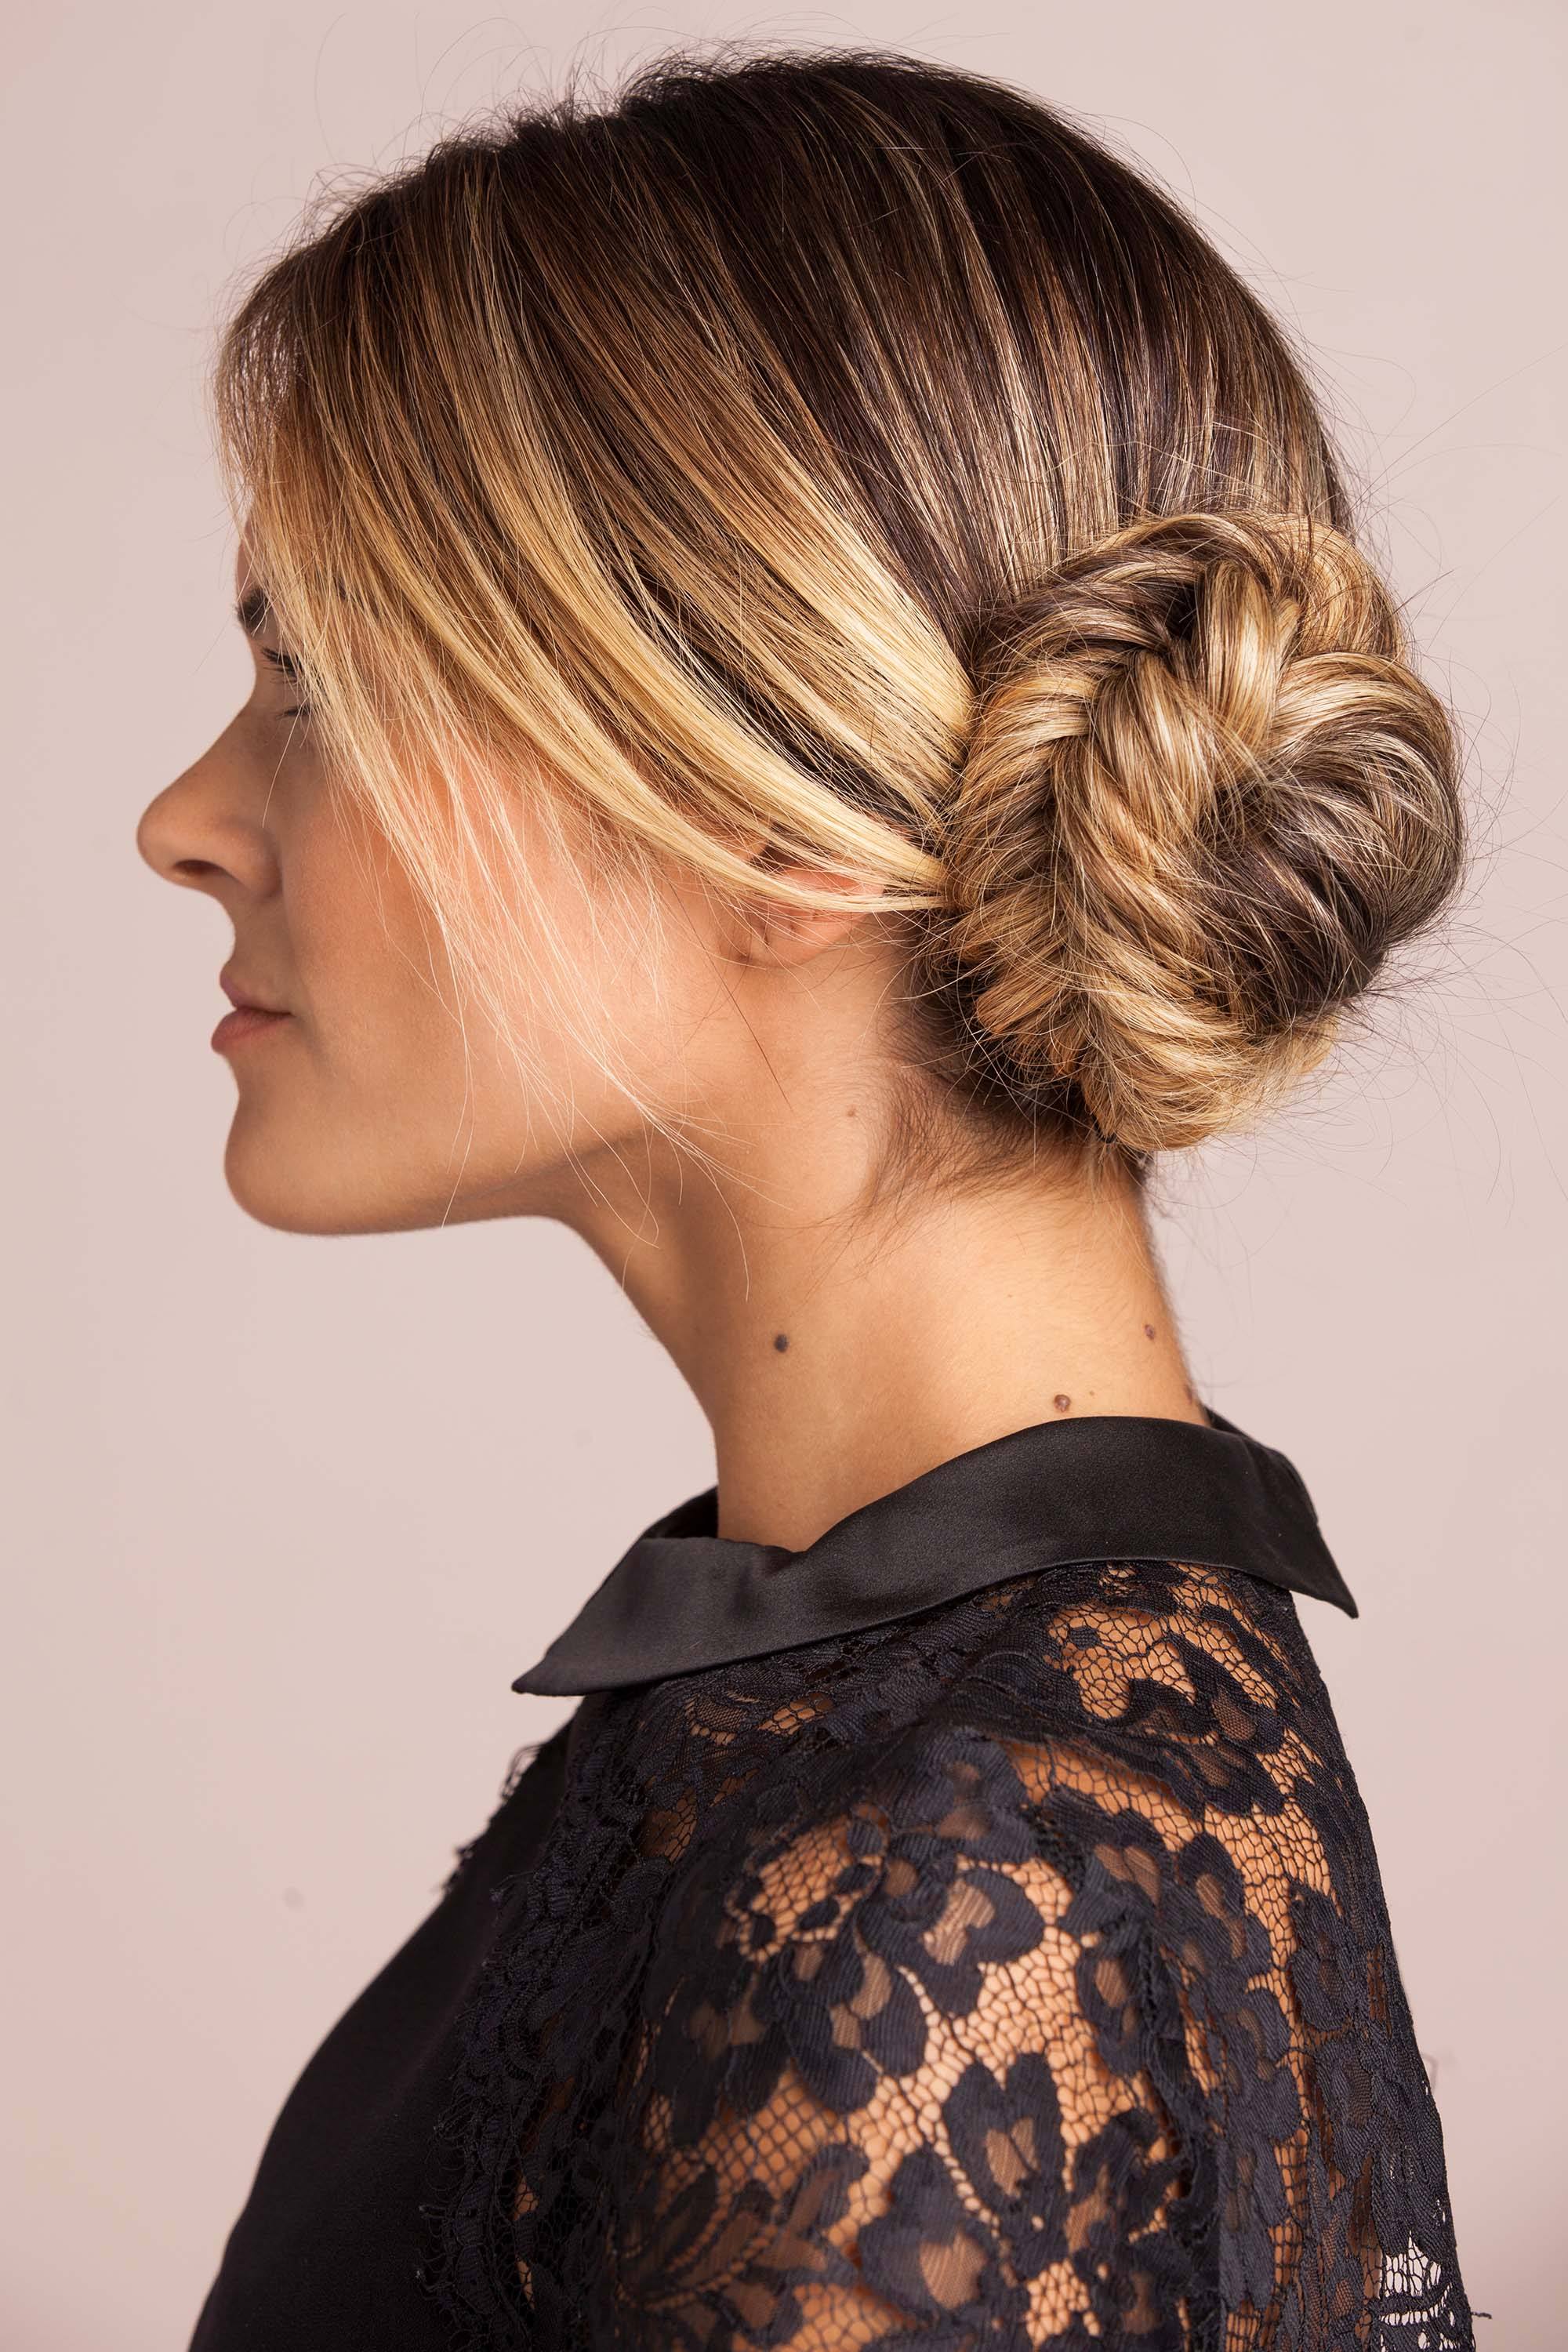 30 Easy Elegant Hairstyles for Women | Styles At Life